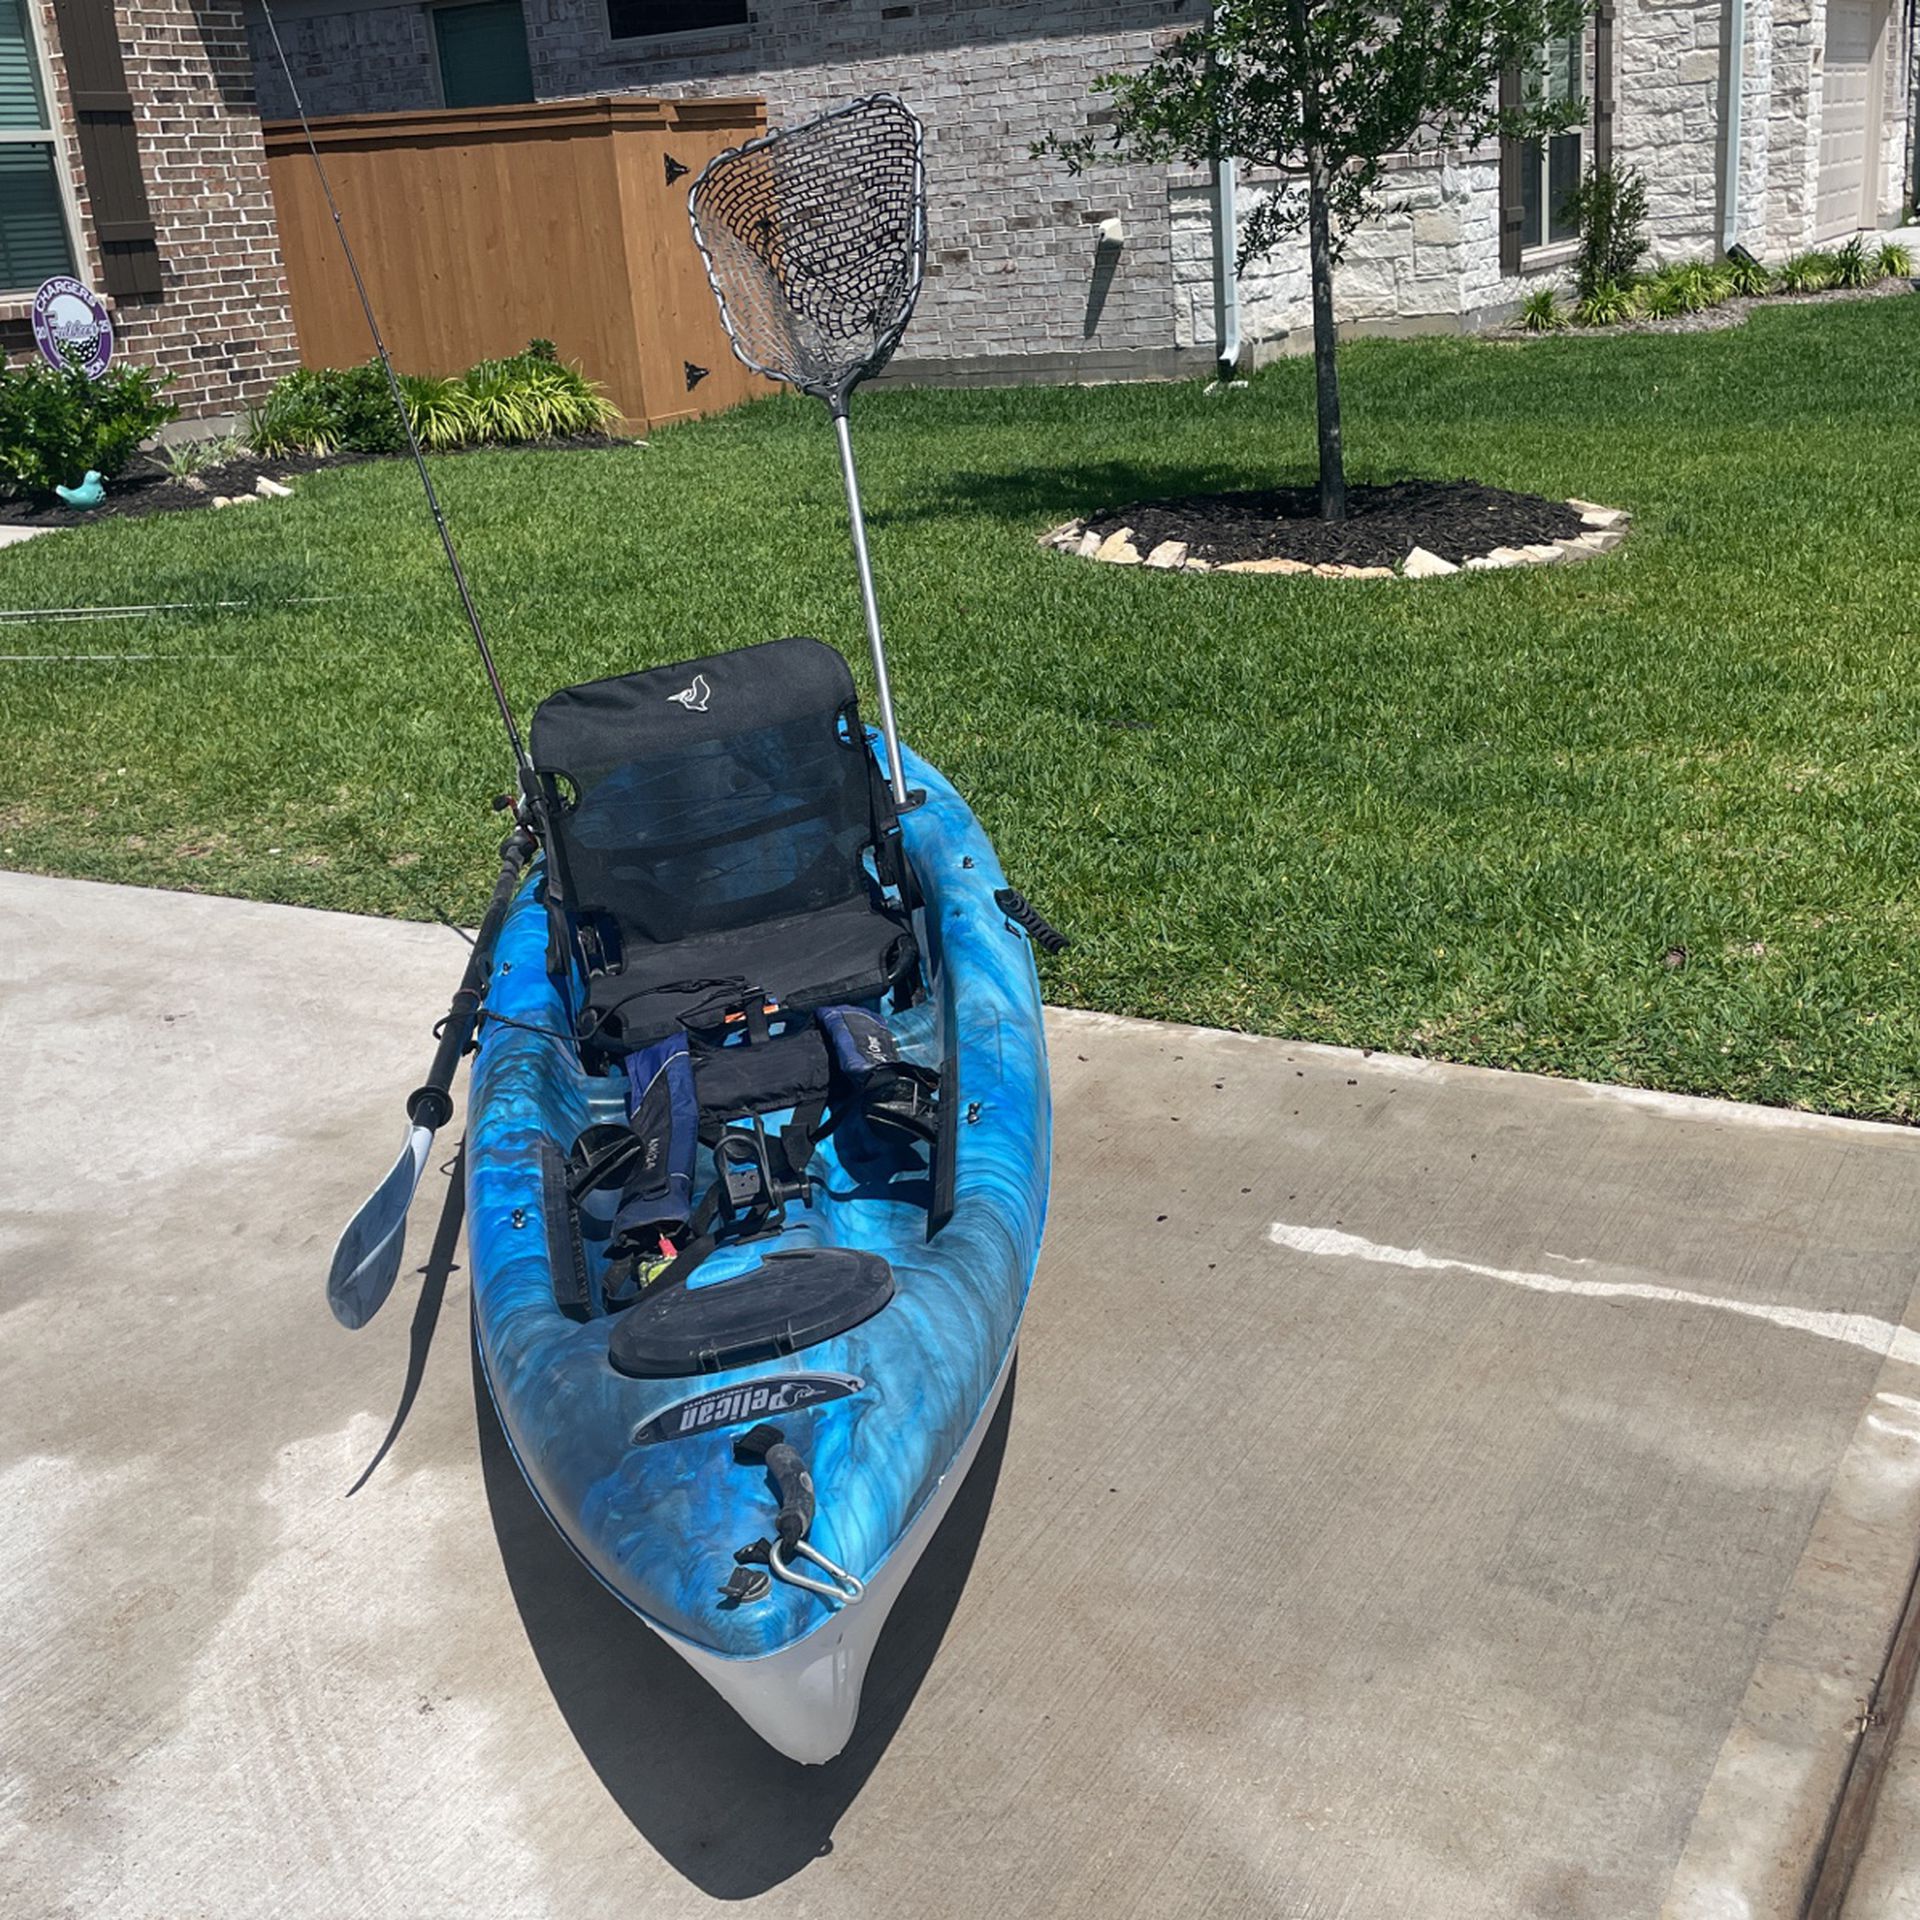 Pelican Kayak With Fishing Gear and Lifevest